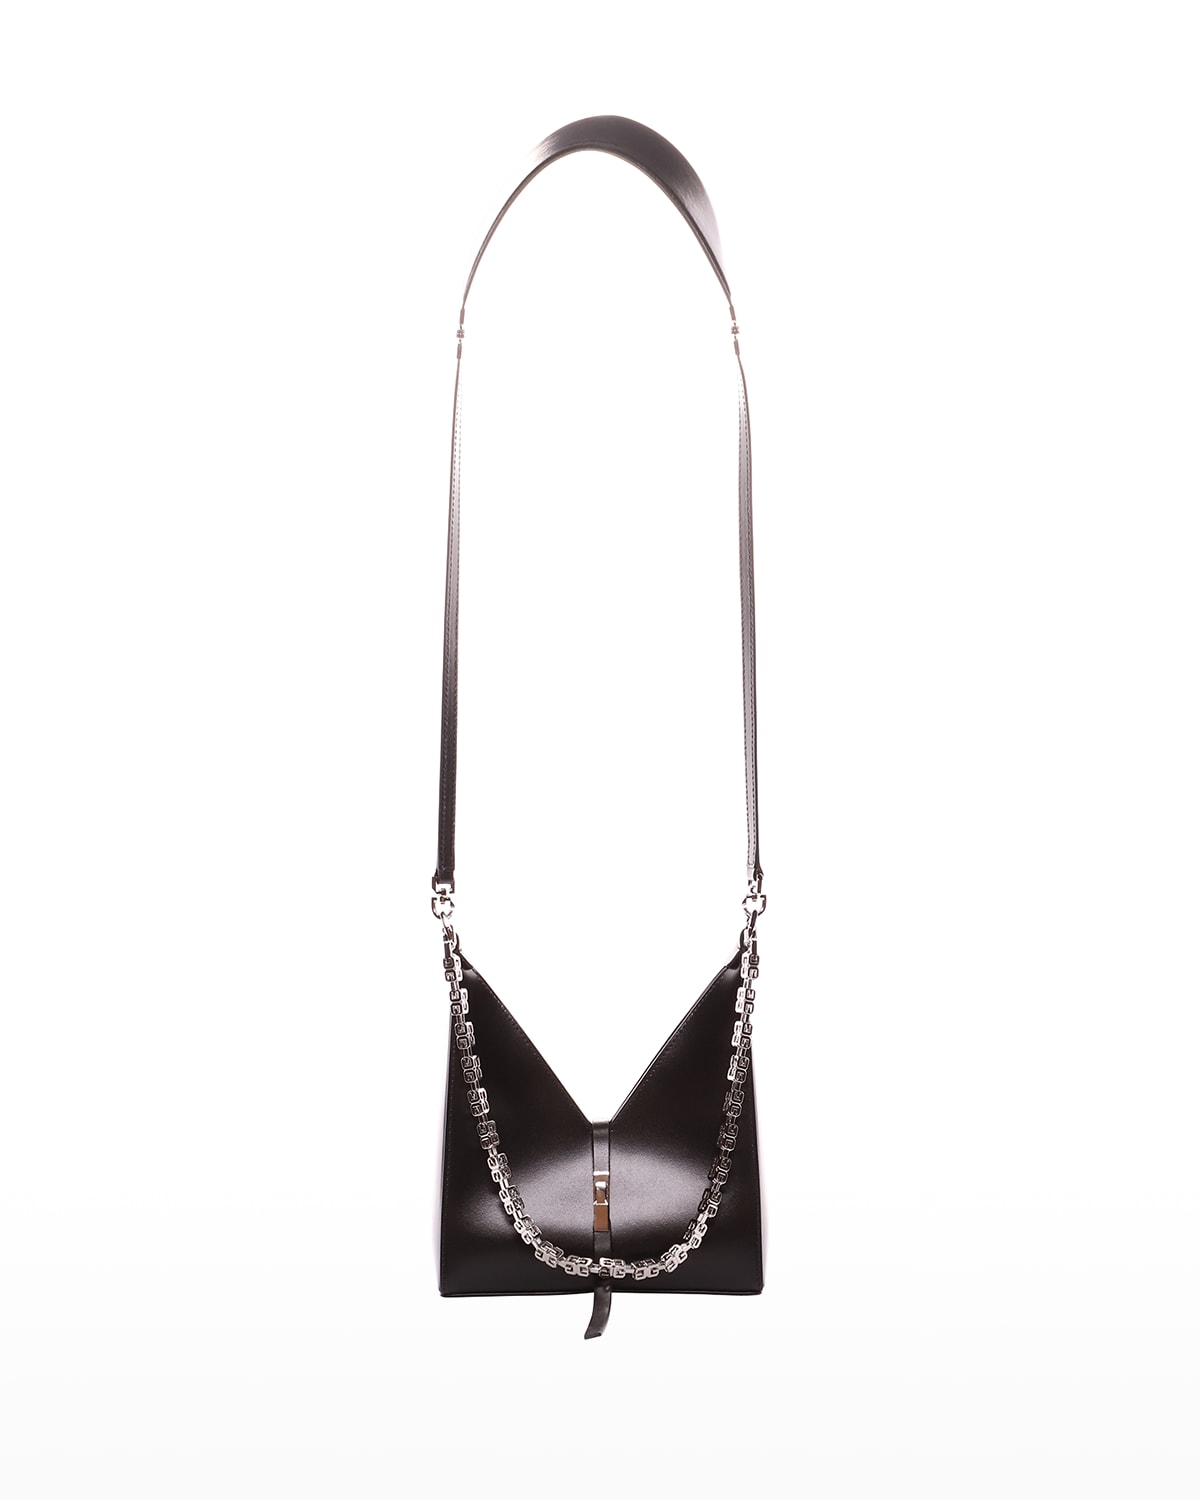 Givenchy Mini Cutout Shoulder Bag with Chain